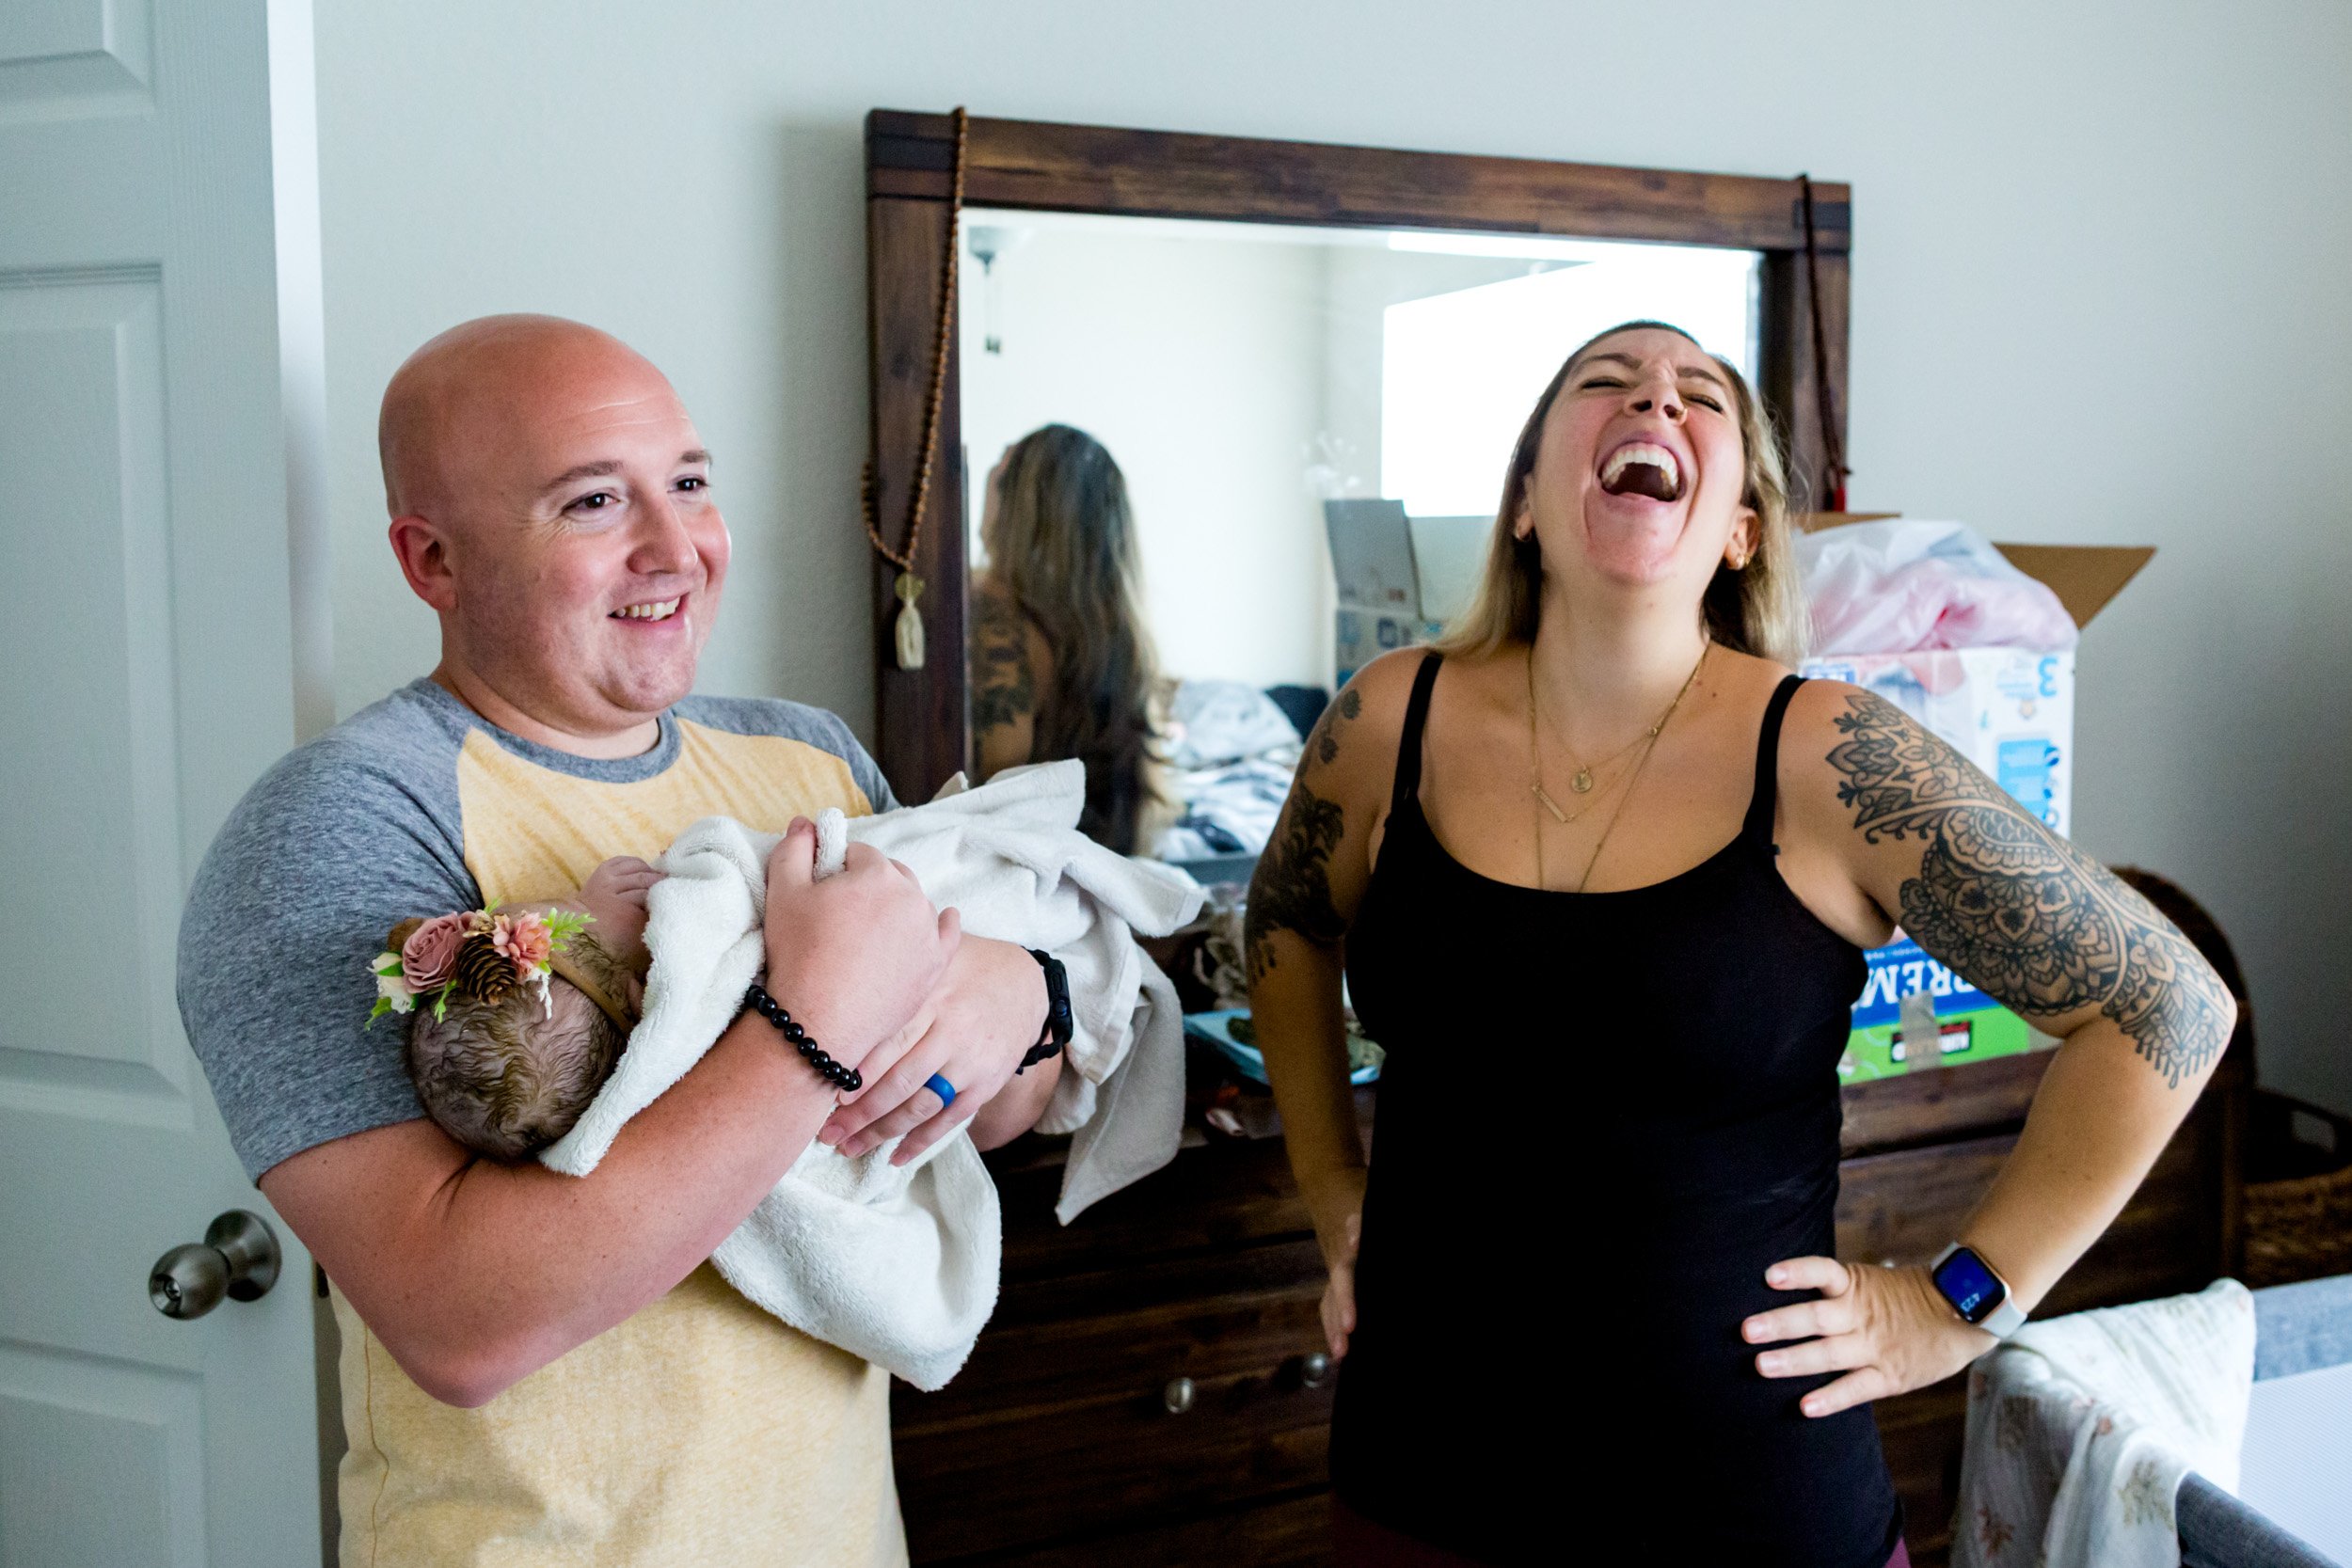 parents laughing together, while holding their newborn baby girl